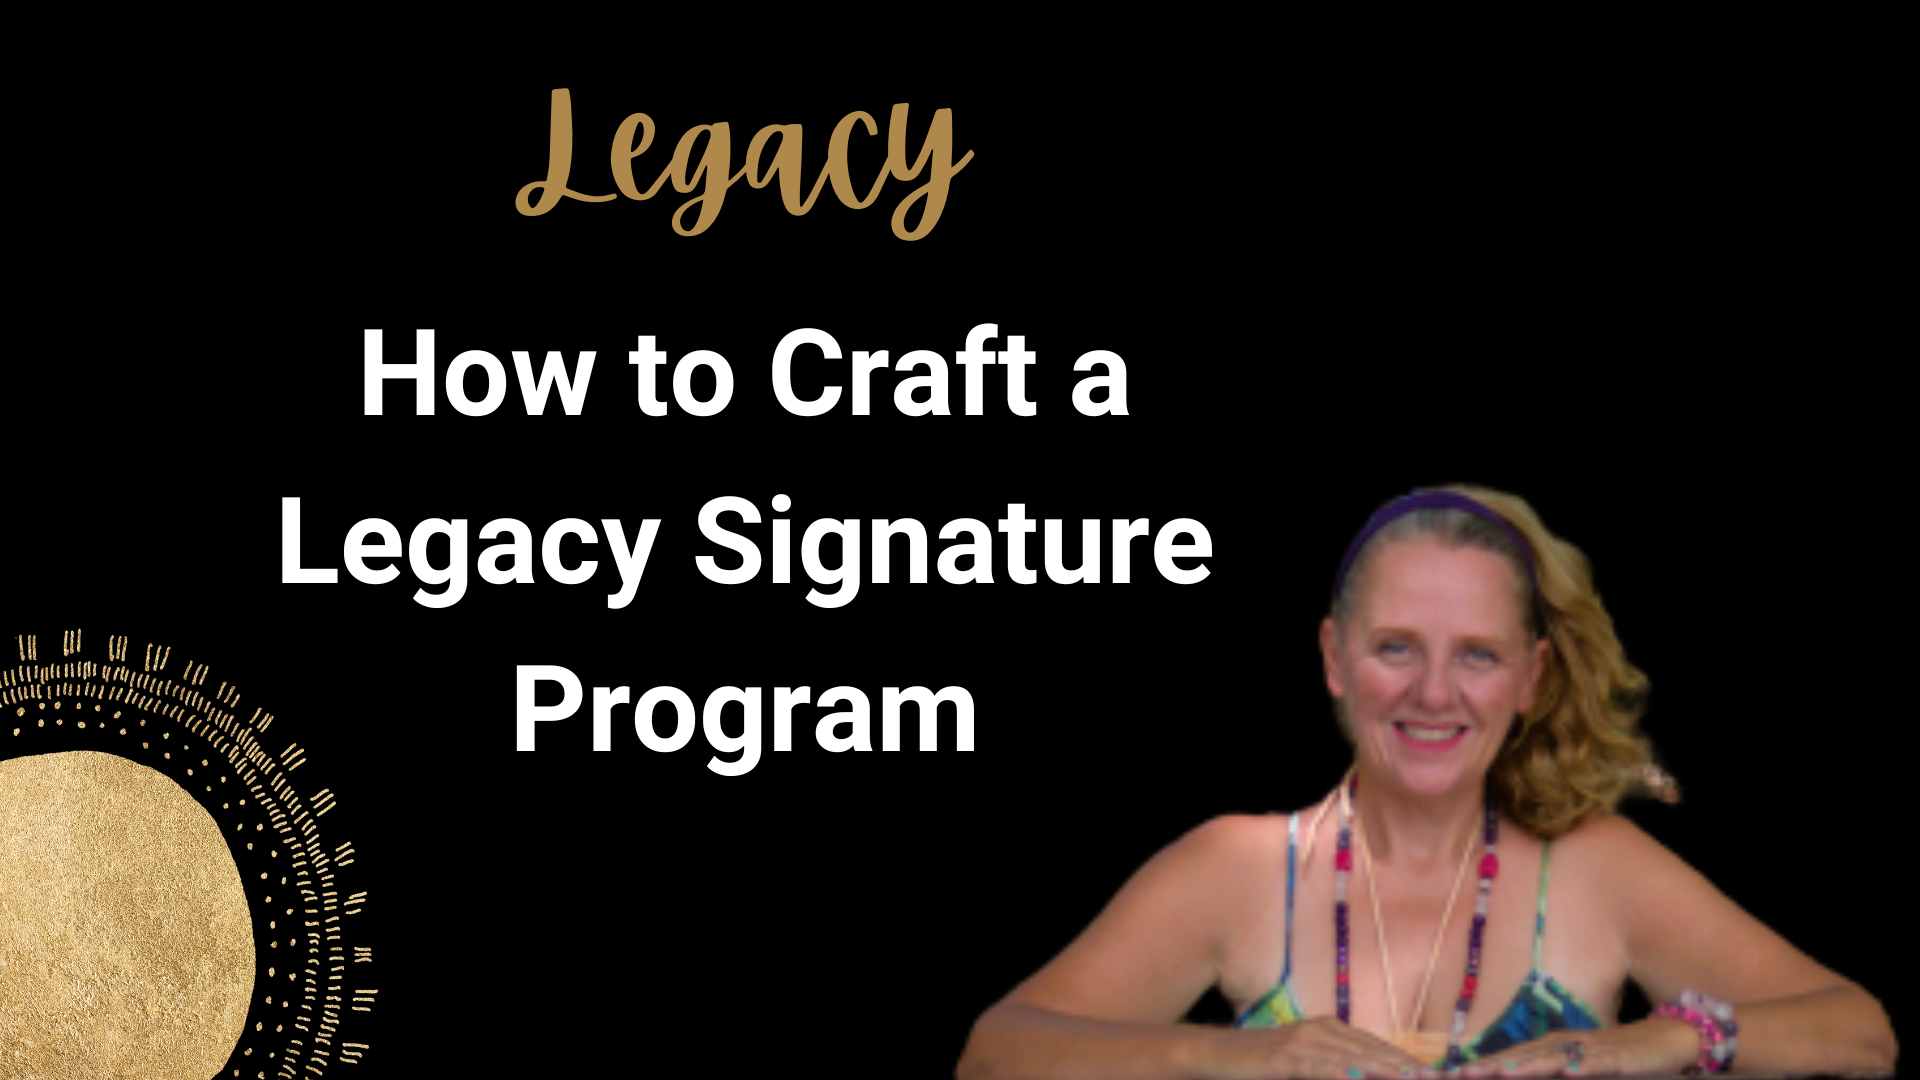 How to Craft a Legacy Signature Program